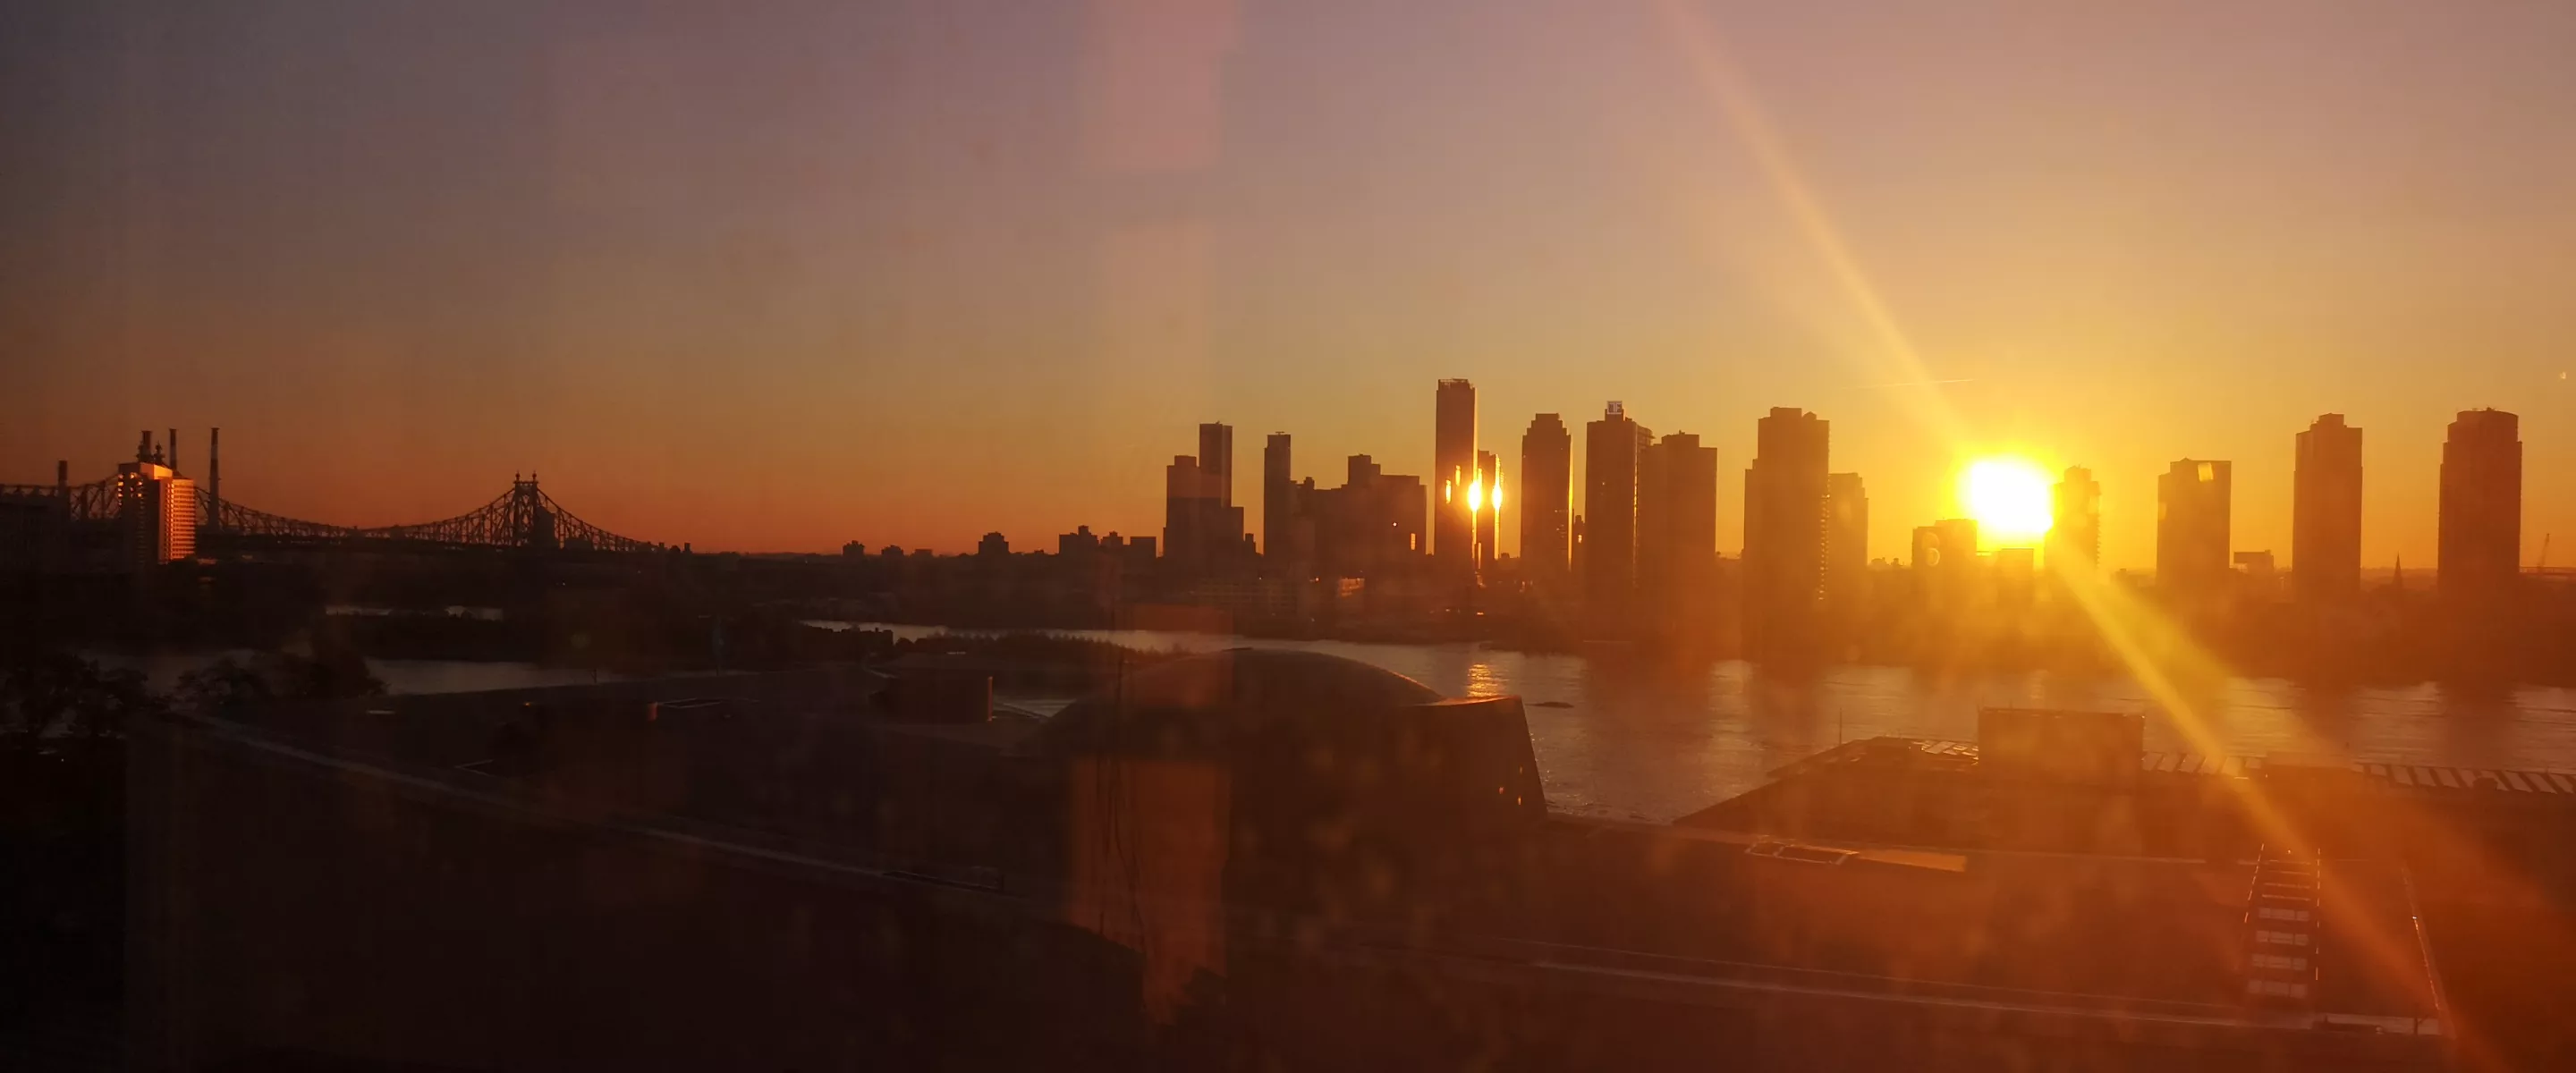 Sunset over the East River and the UN complex, from the view of the MCC UN office in New York City.